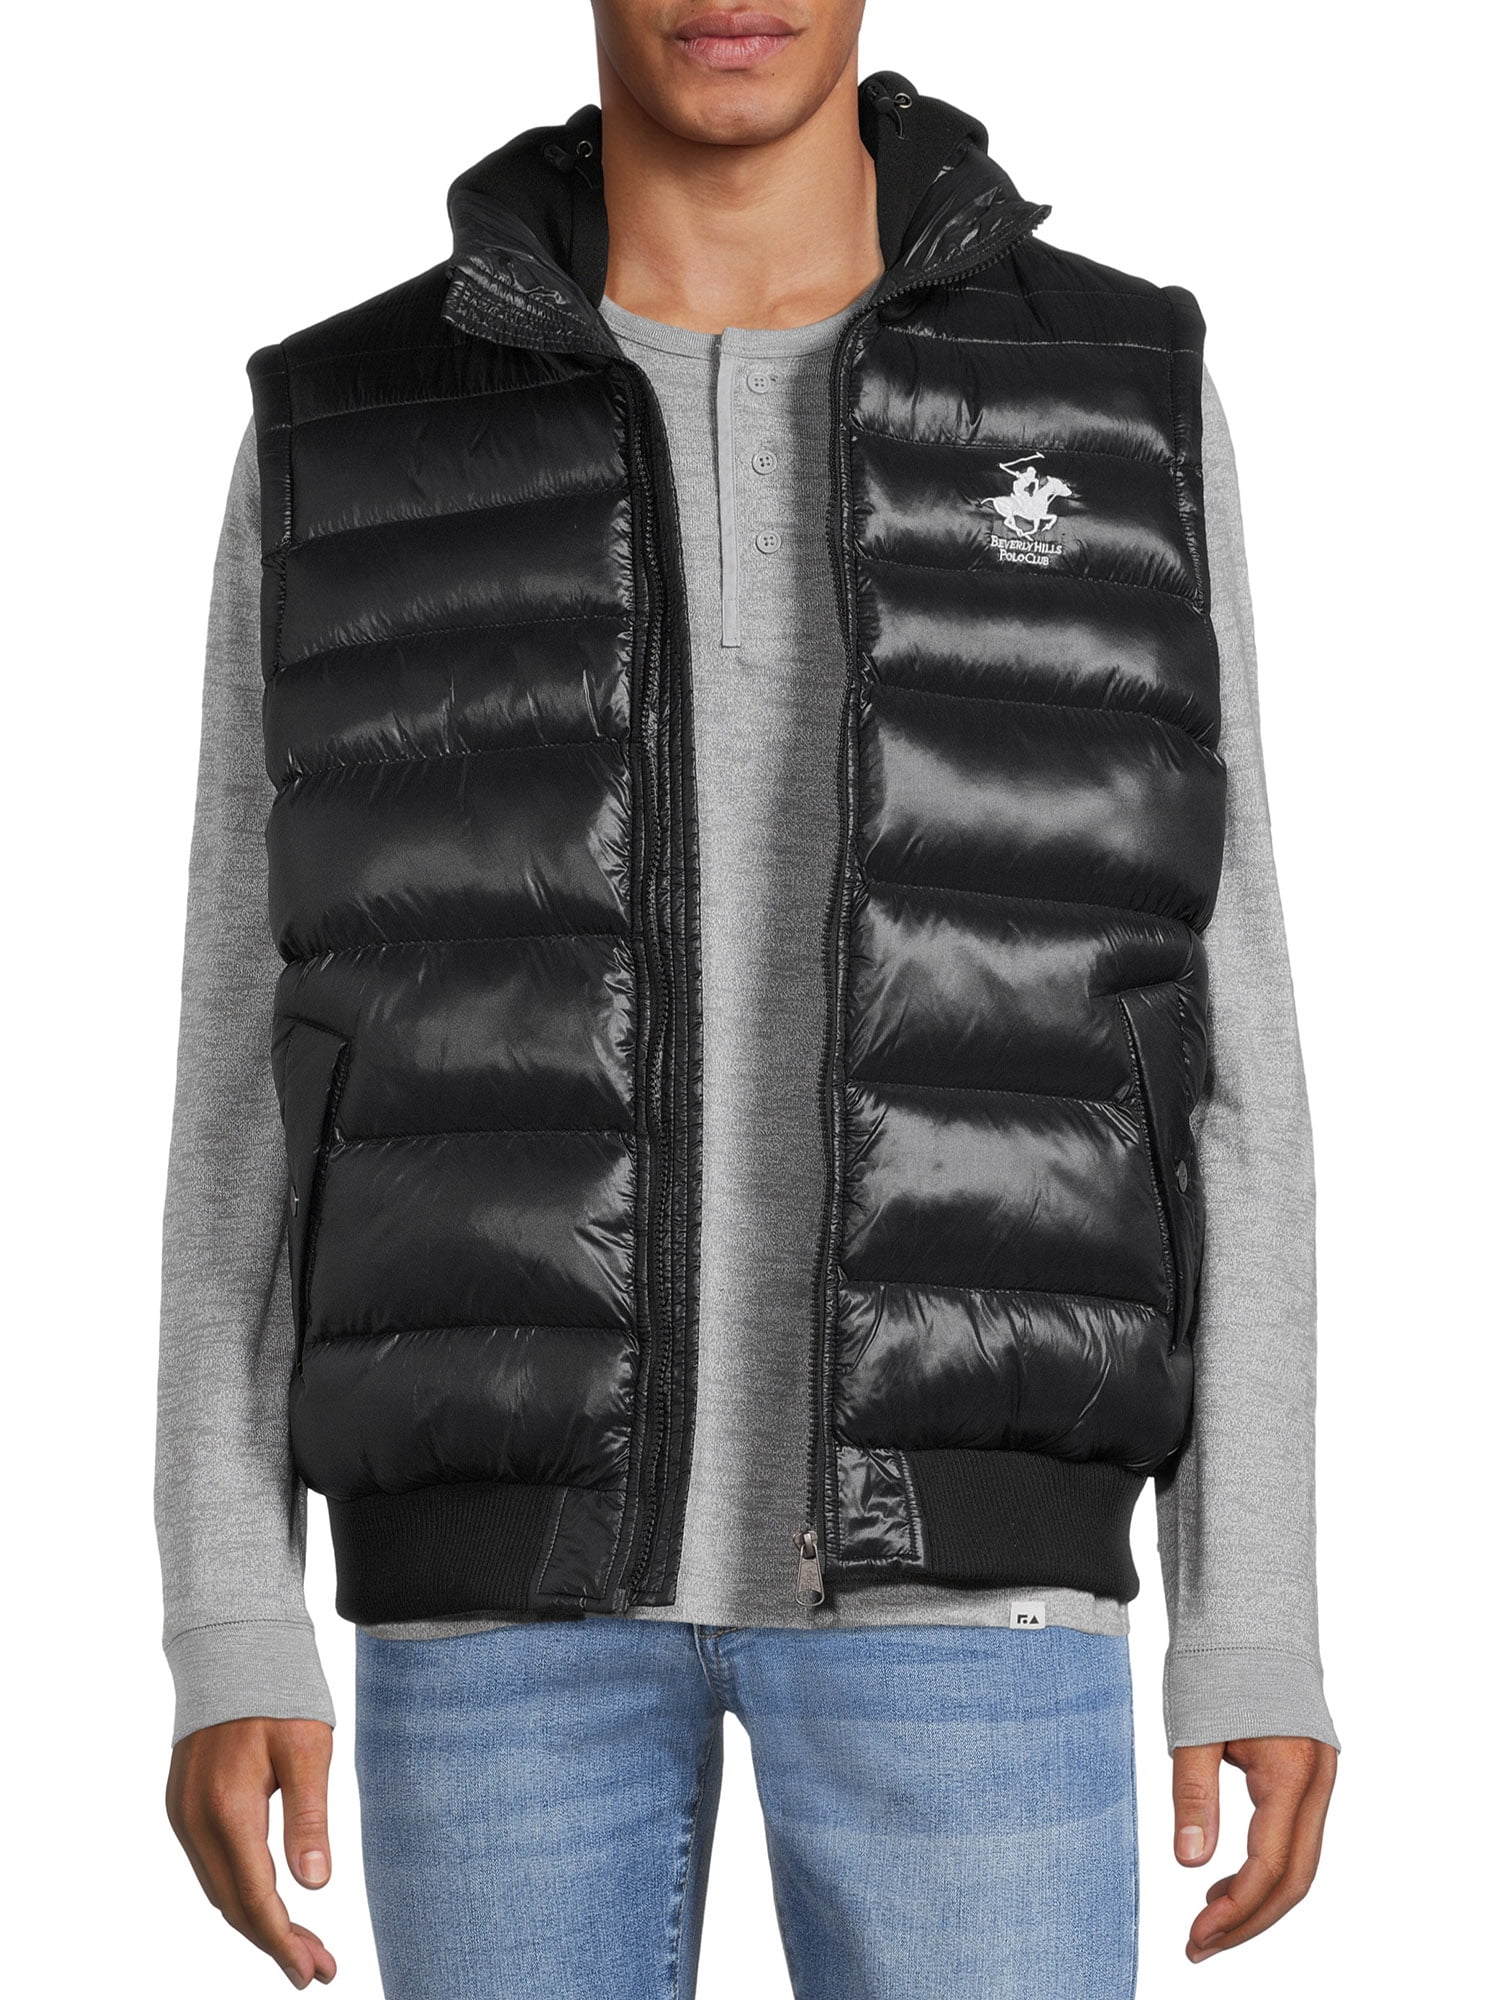 Beverly Hills Polo Club Men's Glossy Puffer Vest with Hood